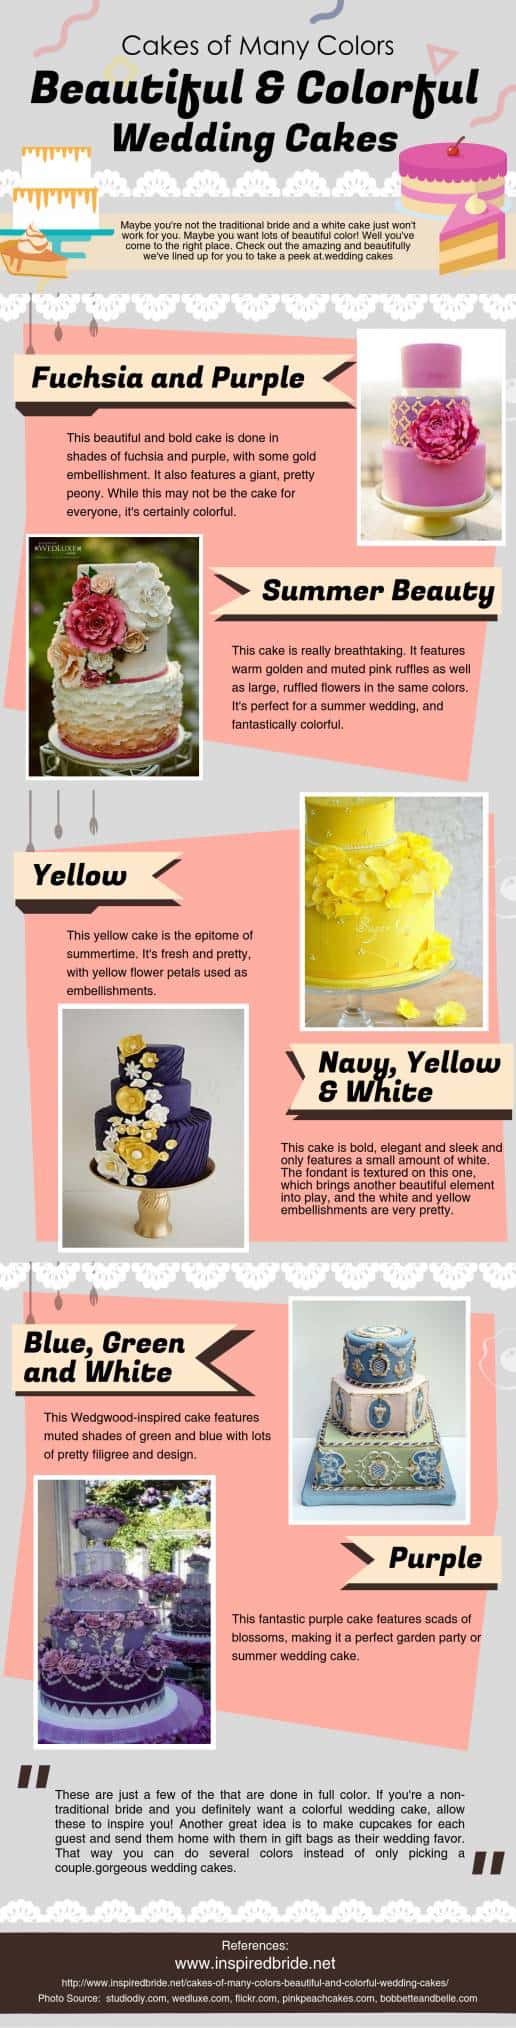 Cakes of Many Colors: Beautiful and Colorful Wedding Cakes 3